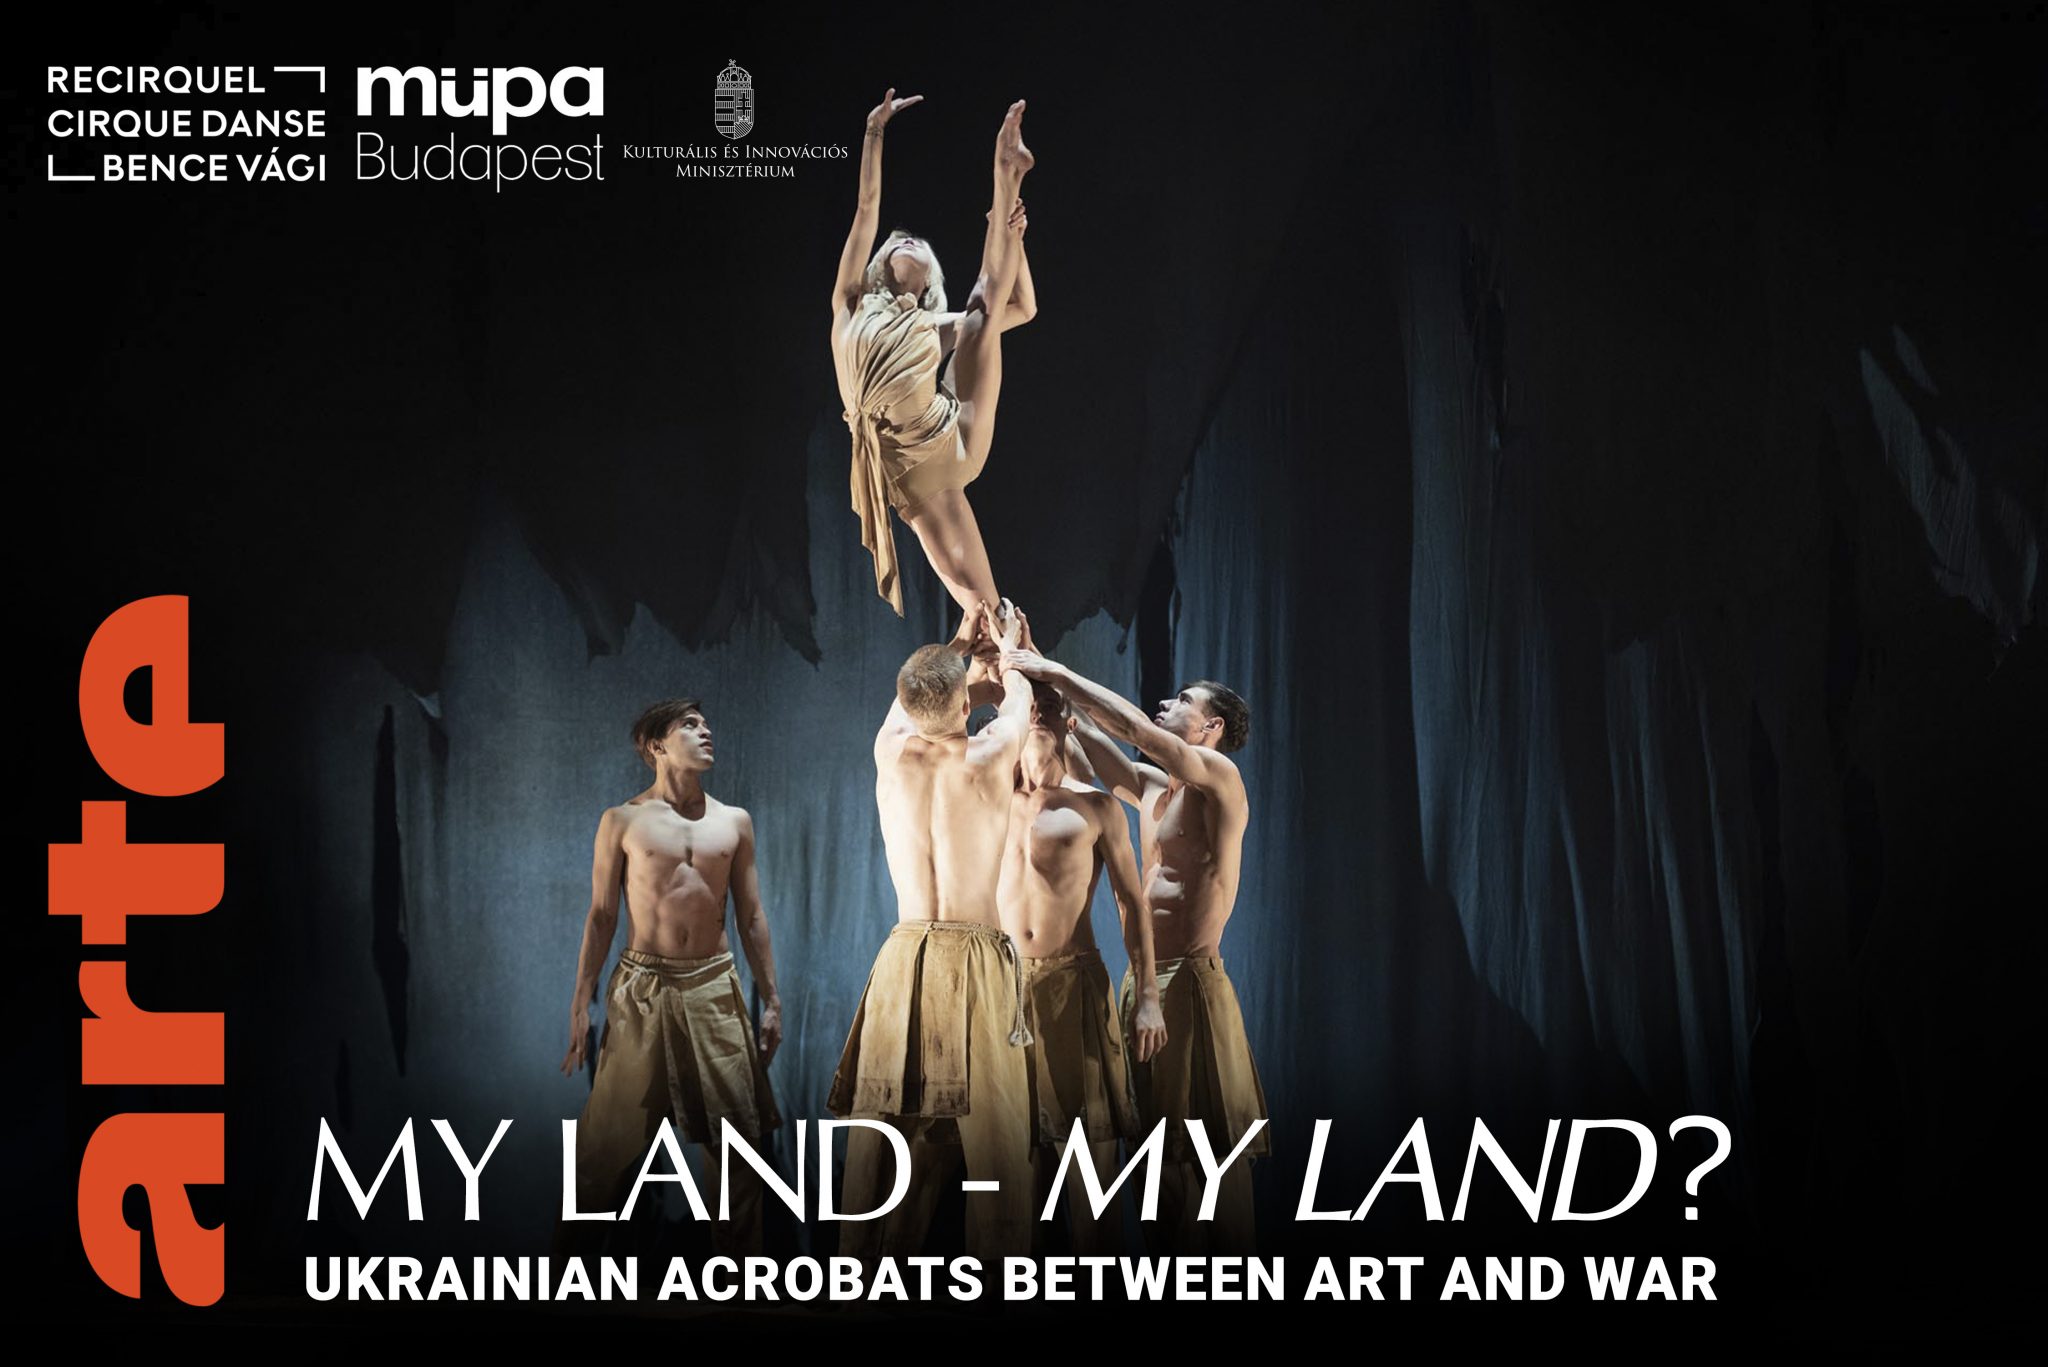 ARTE’s My Land documentary is now available with multiple subtitles